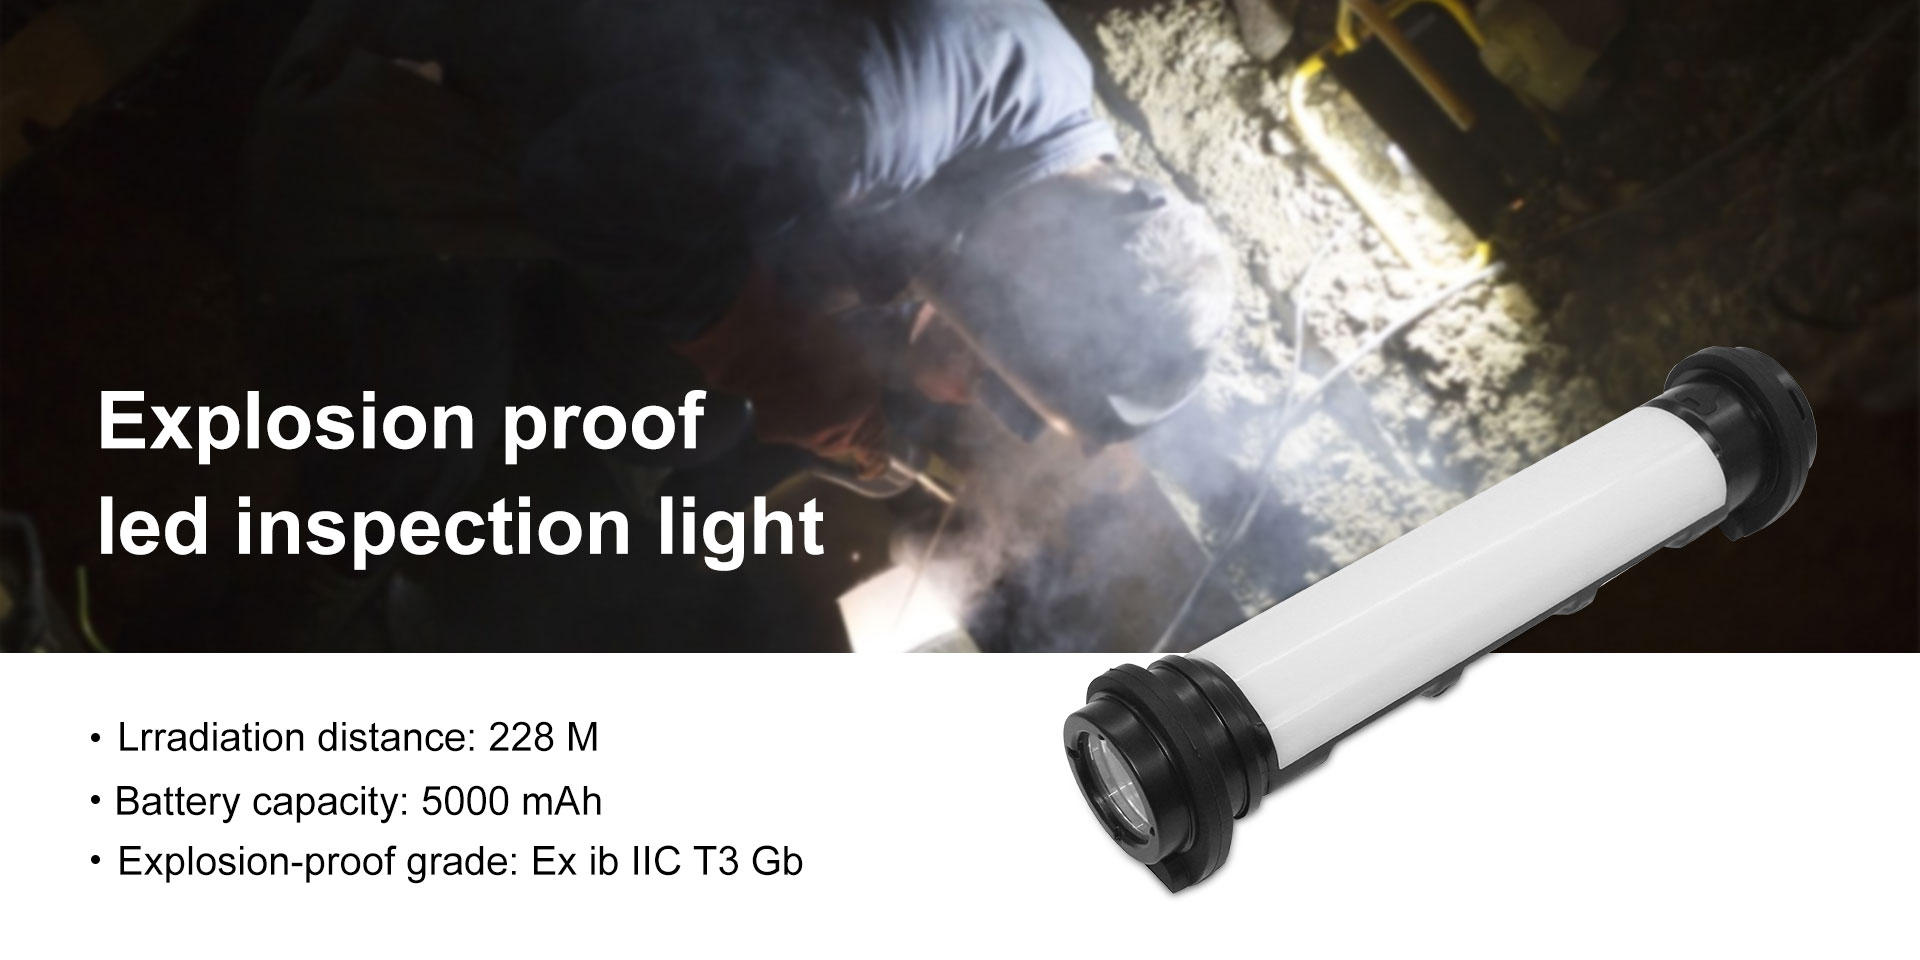 explosion proof led hand lamp